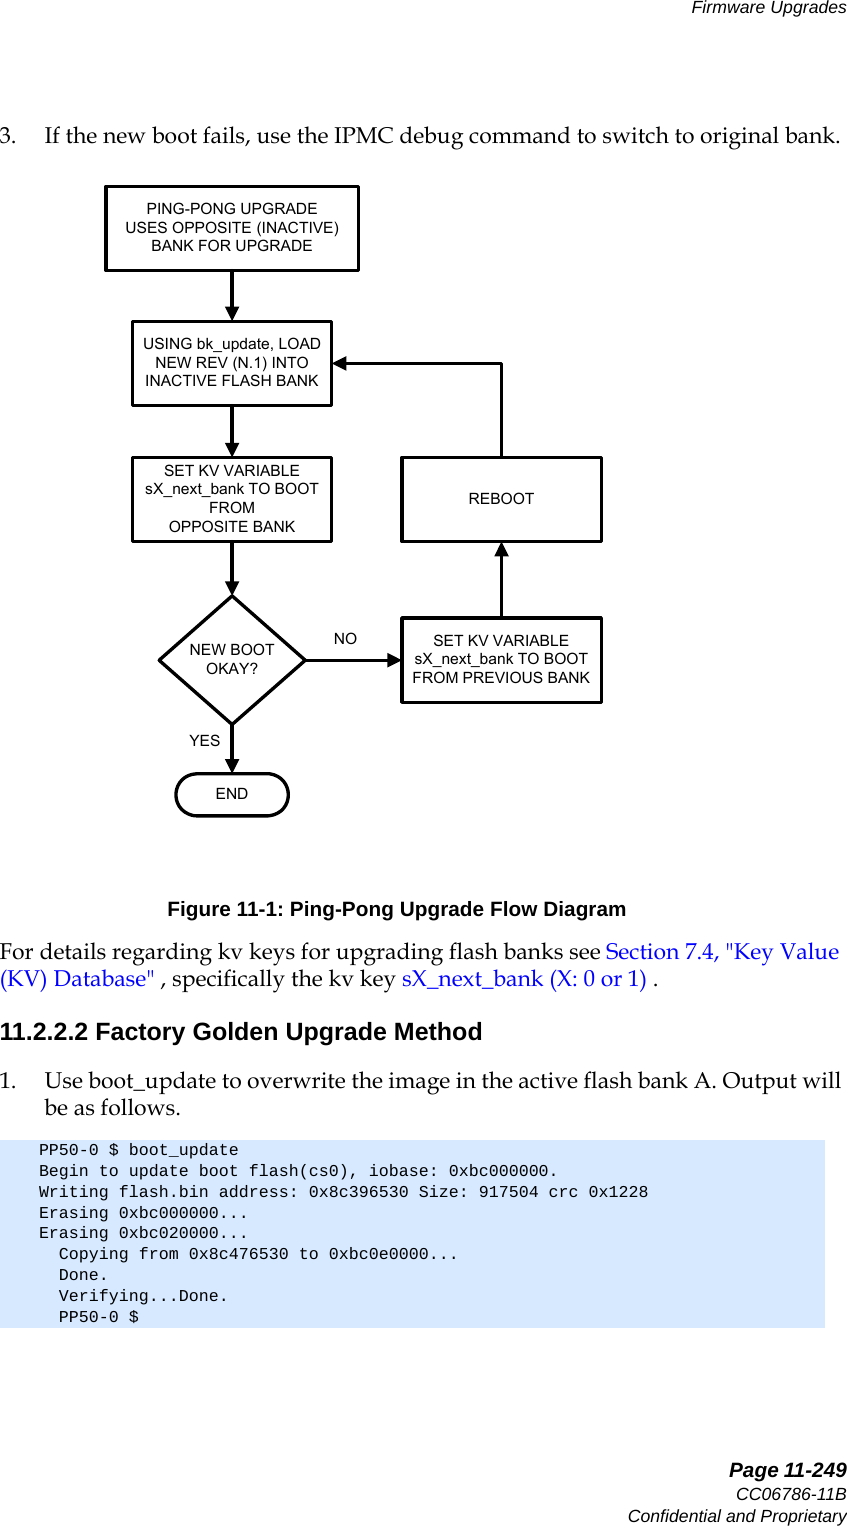   Page 11-249CC06786-11BConfidential and ProprietaryFirmware Upgrades14ABABPreliminary3. If the new boot fails, use the IPMC debug command to switch to original bank.Figure 11-1: Ping-Pong Upgrade Flow DiagramFor details regarding kv keys for upgrading flash banks see Section7.4, &quot;Key Value (KV) Database&quot; , specifically the kv key sX_next_bank (X: 0 or 1) . 11.2.2.2 Factory Golden Upgrade Method1. Use boot_update to overwrite the image in the active flash bank A. Output will be as follows.PP50-0 $ boot_updateBegin to update boot flash(cs0), iobase: 0xbc000000.Writing flash.bin address: 0x8c396530 Size: 917504 crc 0x1228Erasing 0xbc000000...Erasing 0xbc020000...  Copying from 0x8c476530 to 0xbc0e0000...  Done.  Verifying...Done.  PP50-0 $PING-PONG UPGRADEUSES OPPOSITE (INACTIVE) BANK FOR UPGRADEUSING bk_update, LOAD NEW REV (N.1) INTO INACTIVE FLASH BANKSET KV VARIABLE sX_next_bank TO BOOT FROM PREVIOUS BANKNEW BOOT OKAY?ENDREBOOTSET KV VARIABLE sX_next_bank TO BOOT FROM OPPOSITE BANKYESNO